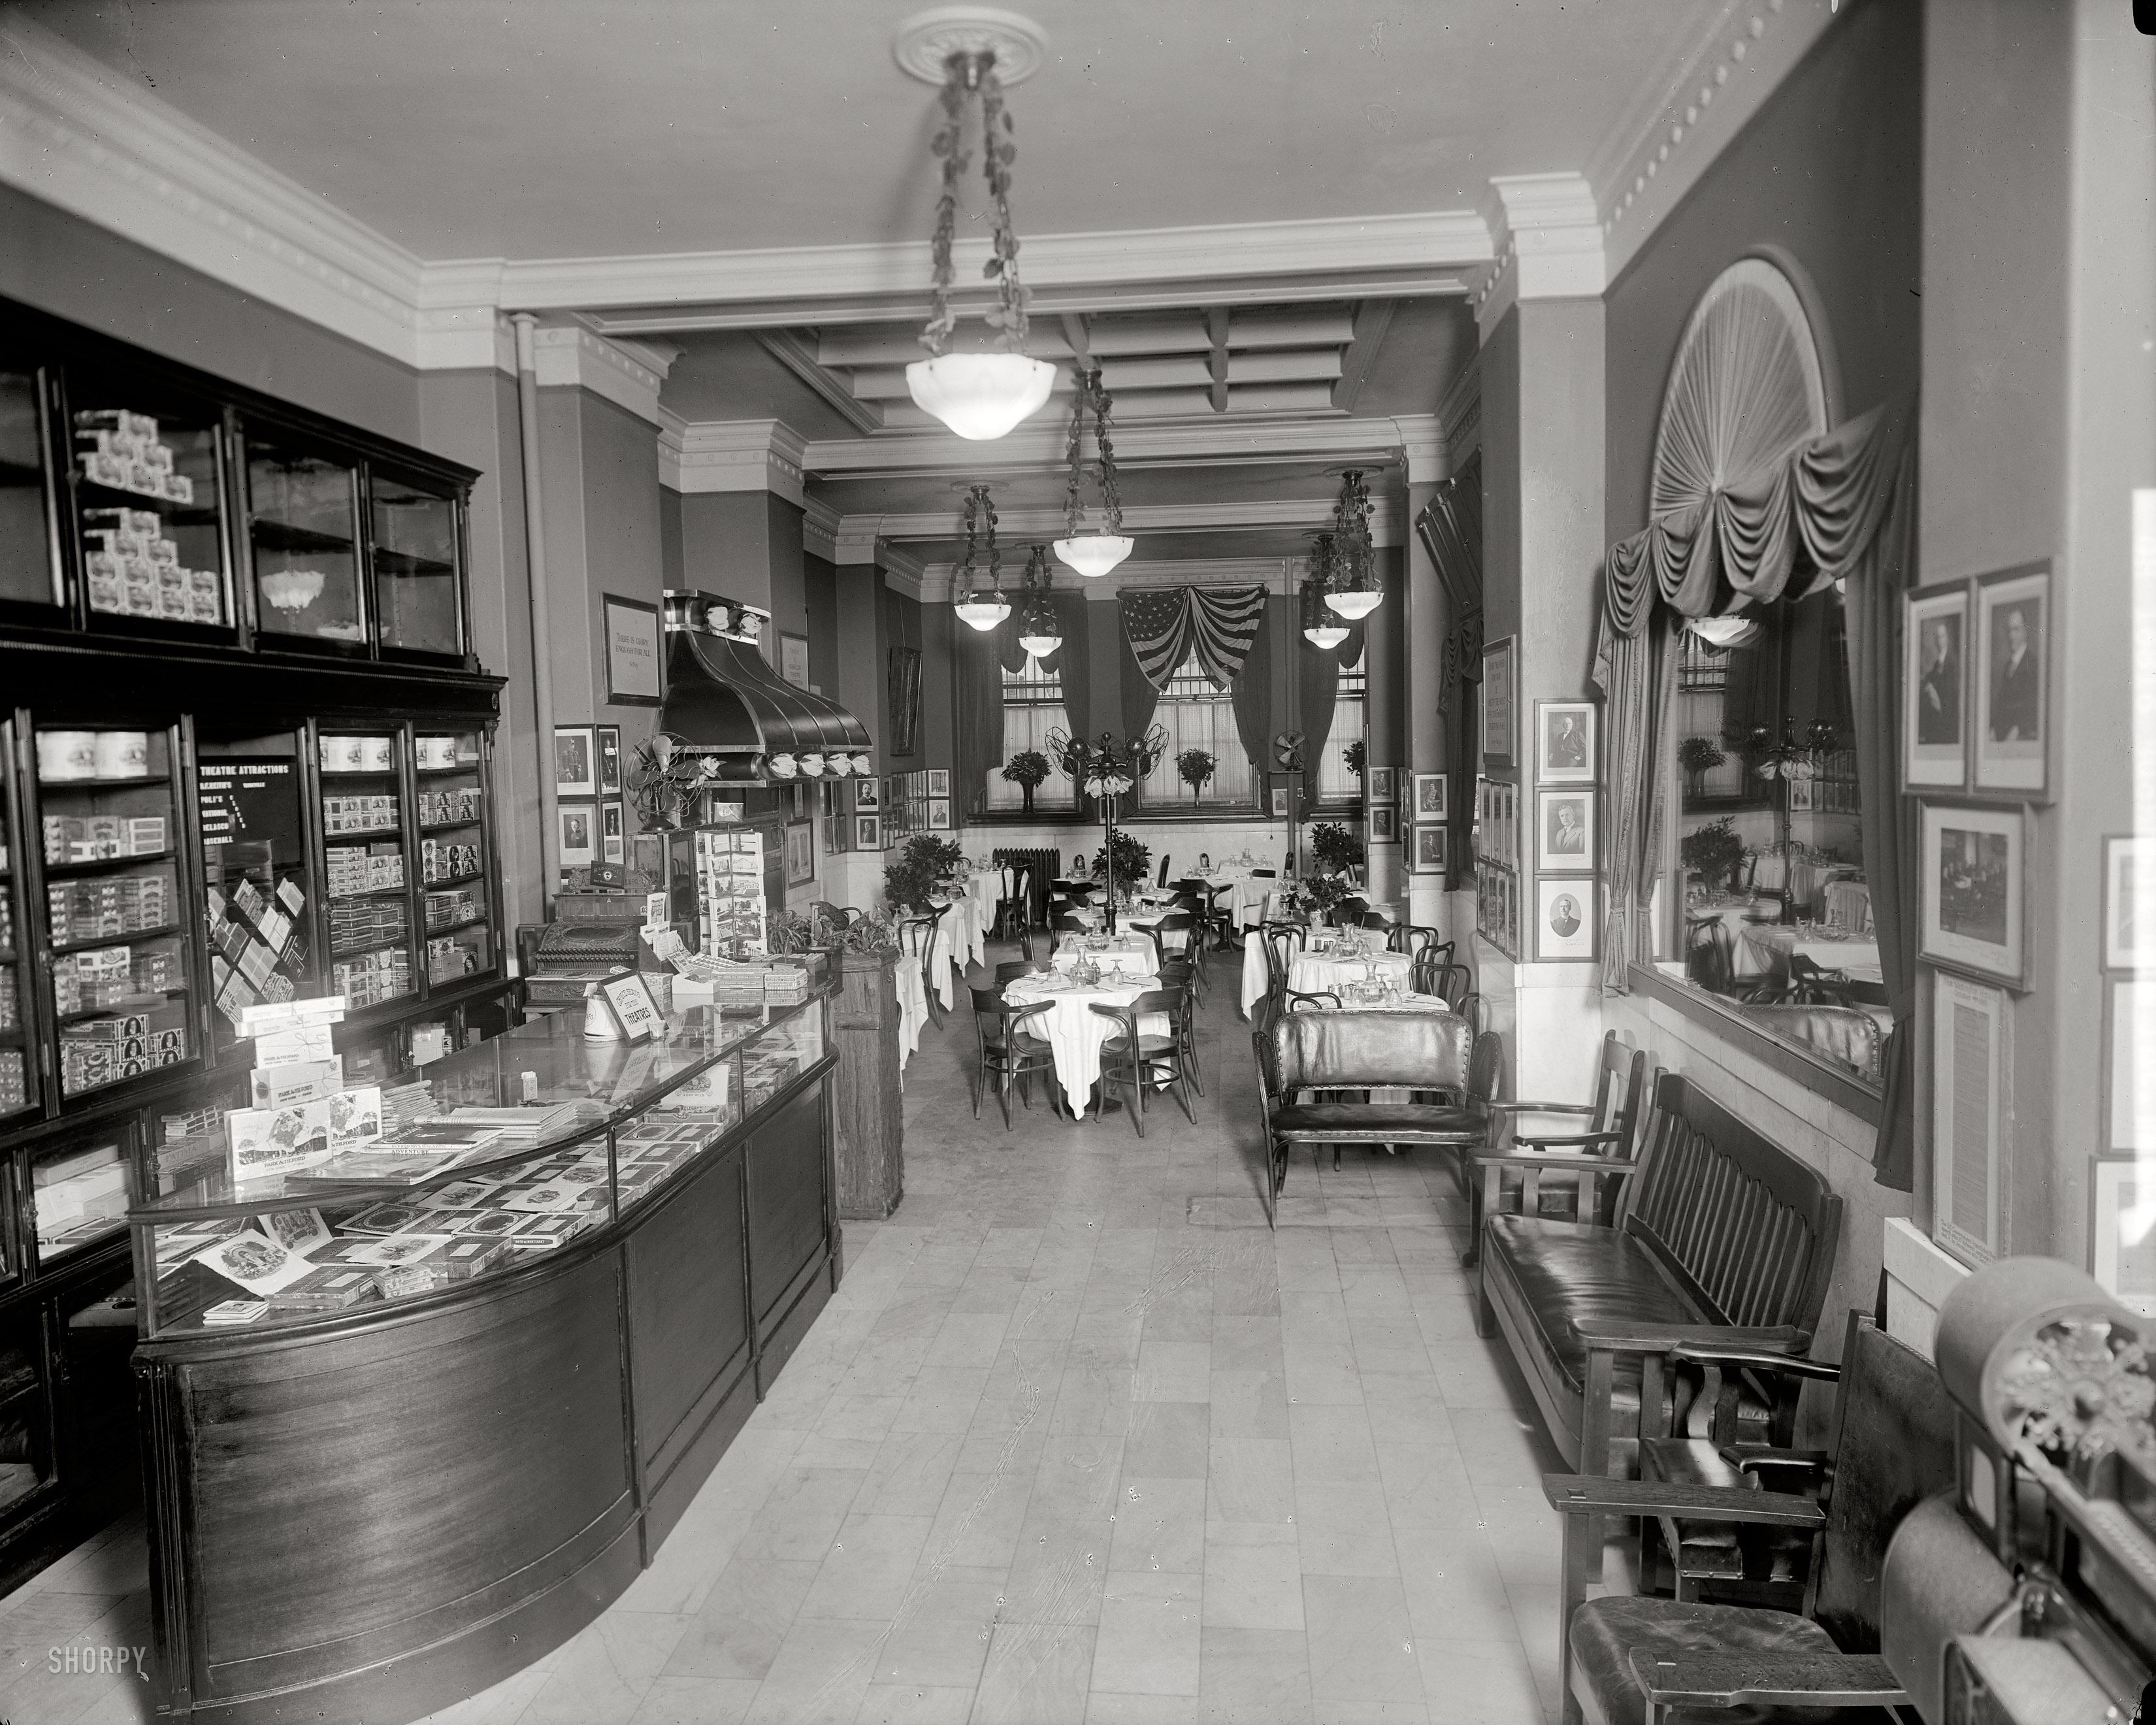 Washington, D.C., circa 1920. "Gus Buchholz, Occidental Hotel interior." A view of the restaurant. Harris & Ewing Collection glass negative. View full size.